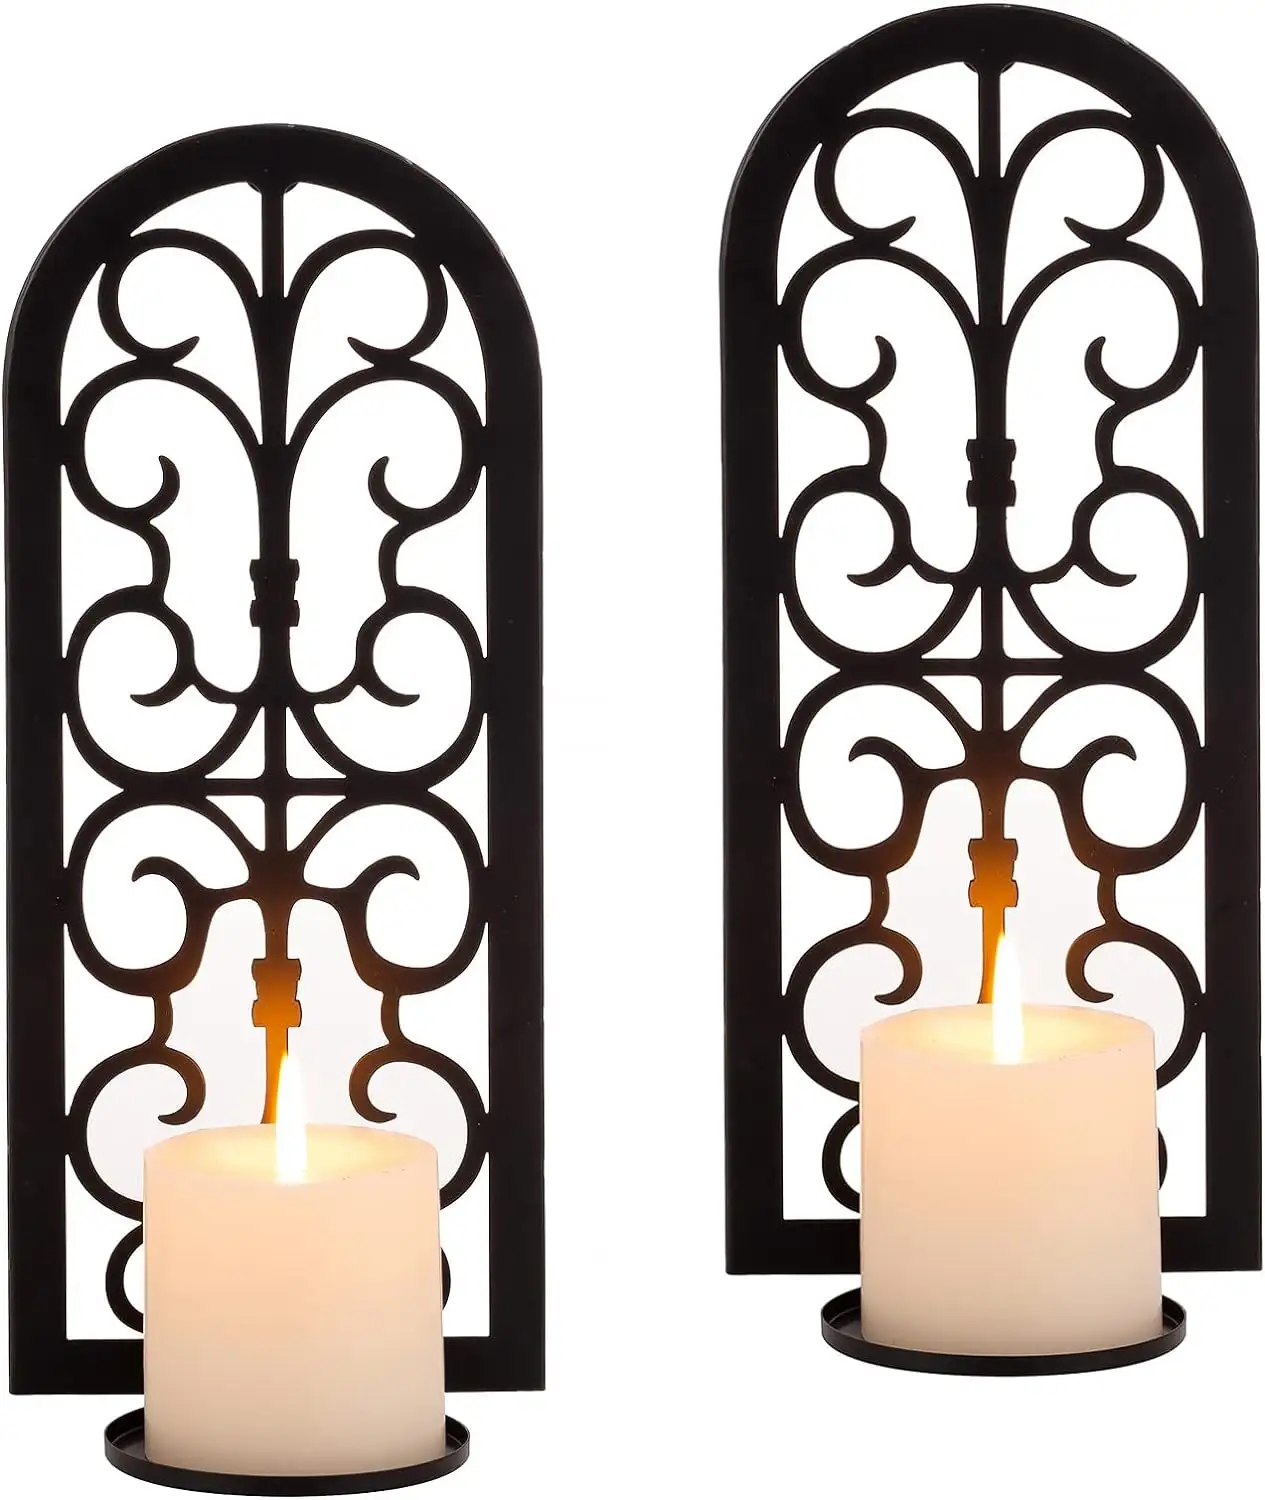 Metal Candle Sconces Hanging Wall Candle Holders Set of 2 Black Vintage Wall Mounted Sconce for Tea Light Pillar Candles